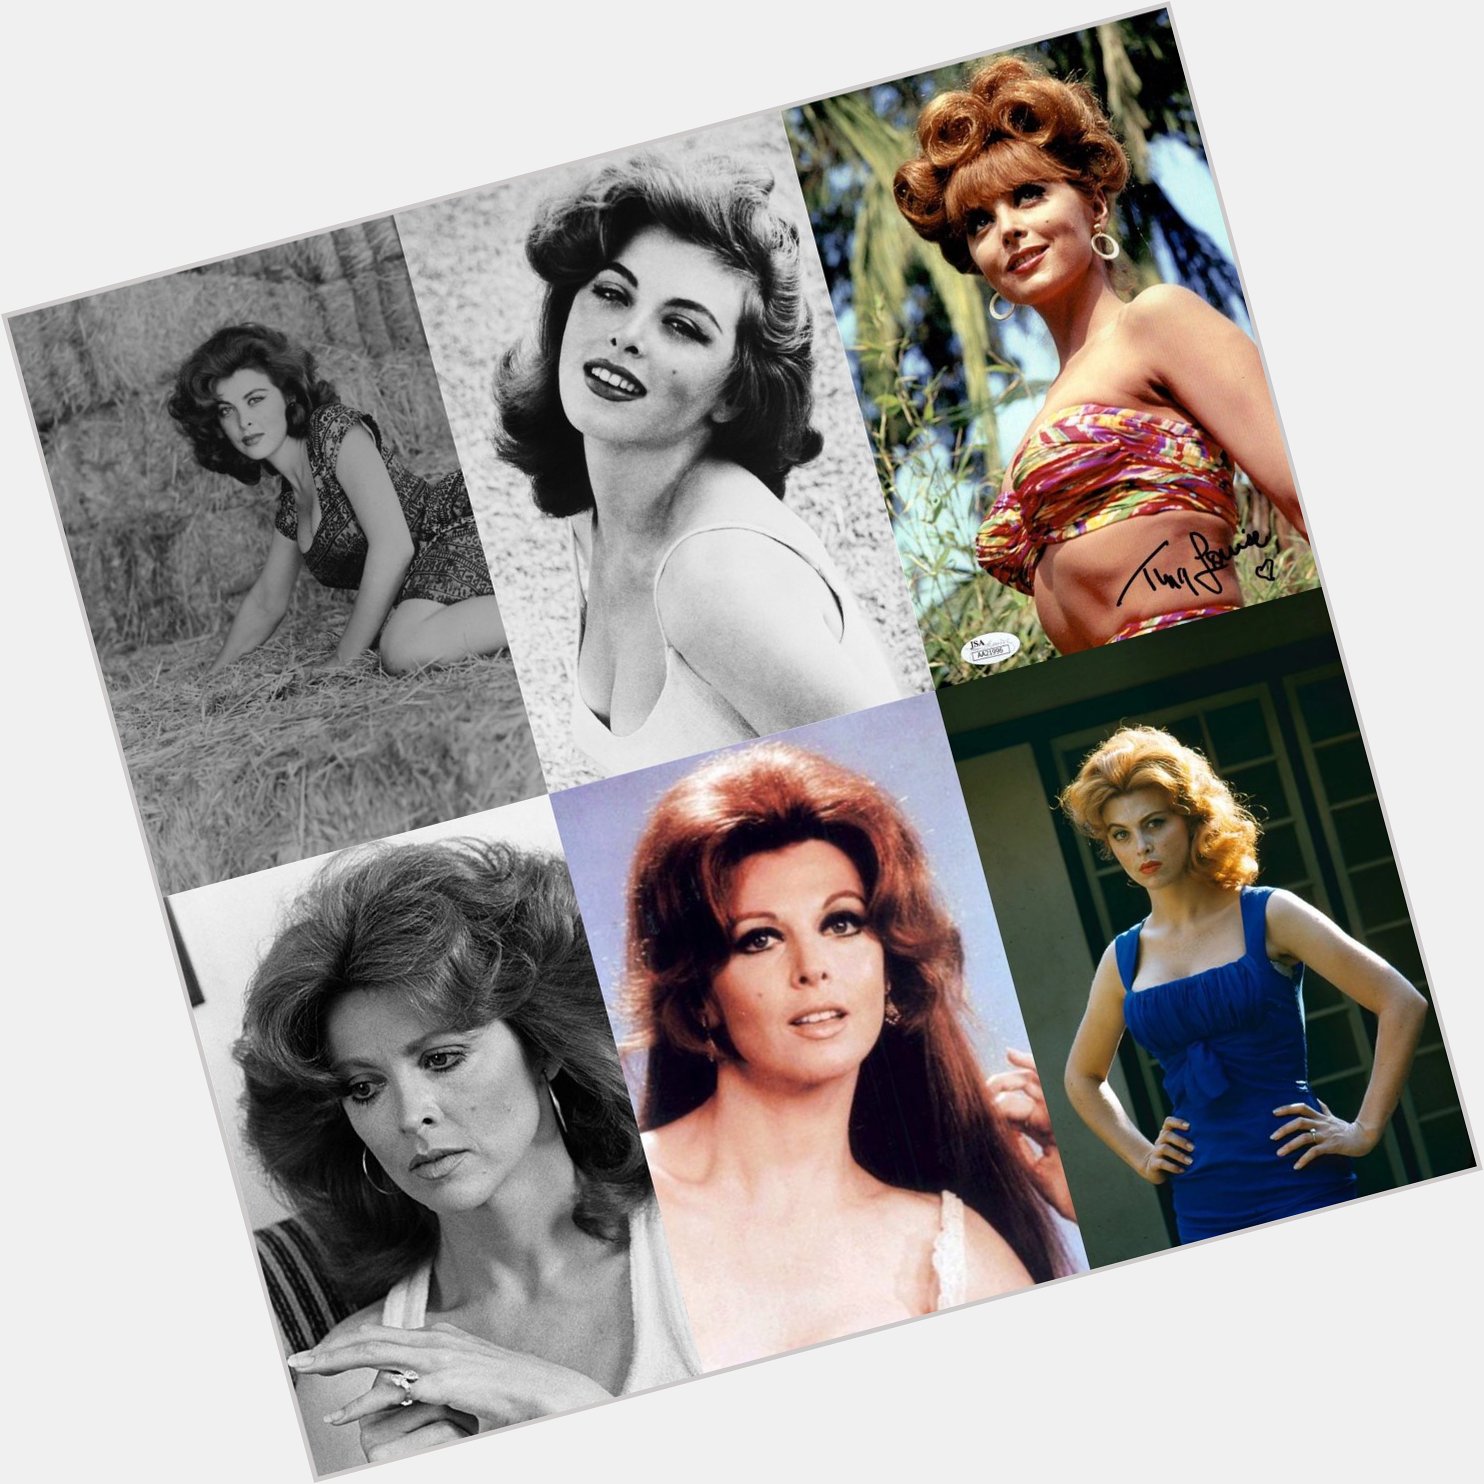 Happy 87 birthday to Tina Louise. Hope that she has a wonderful birthday.         